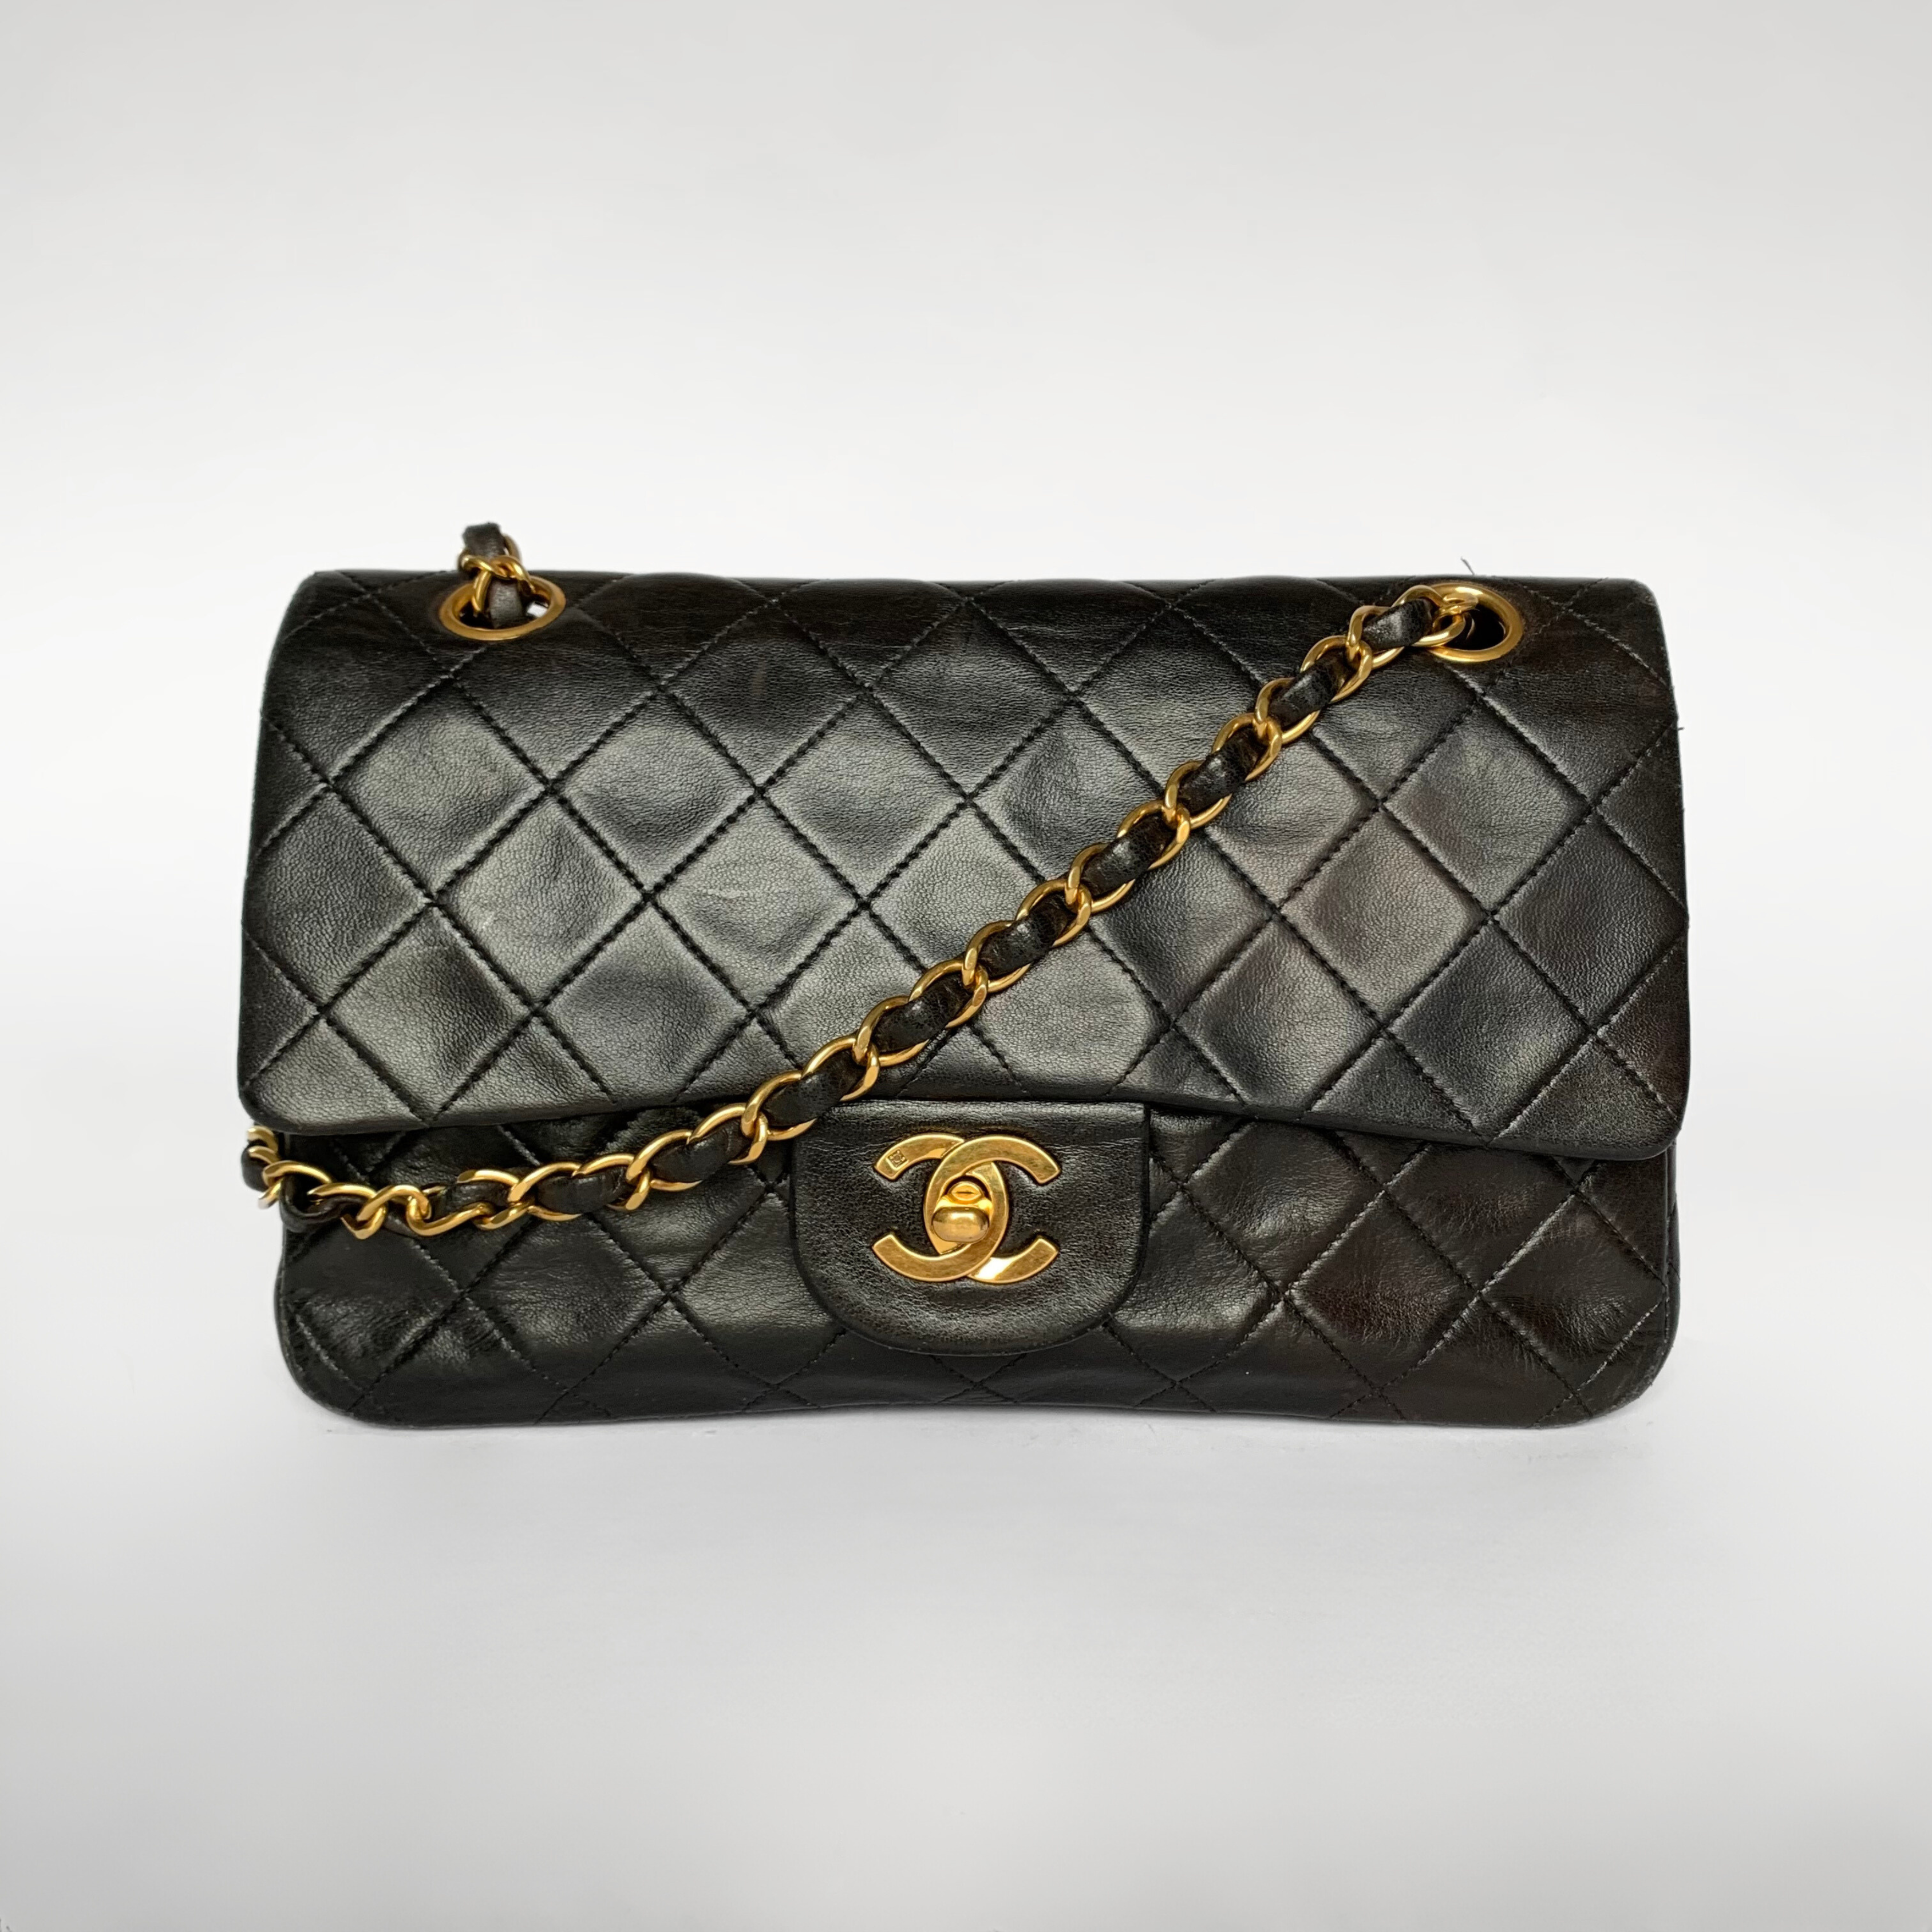 Chanel Chain Rows Flap Bag Quilted Lambskin Small Black | eBay